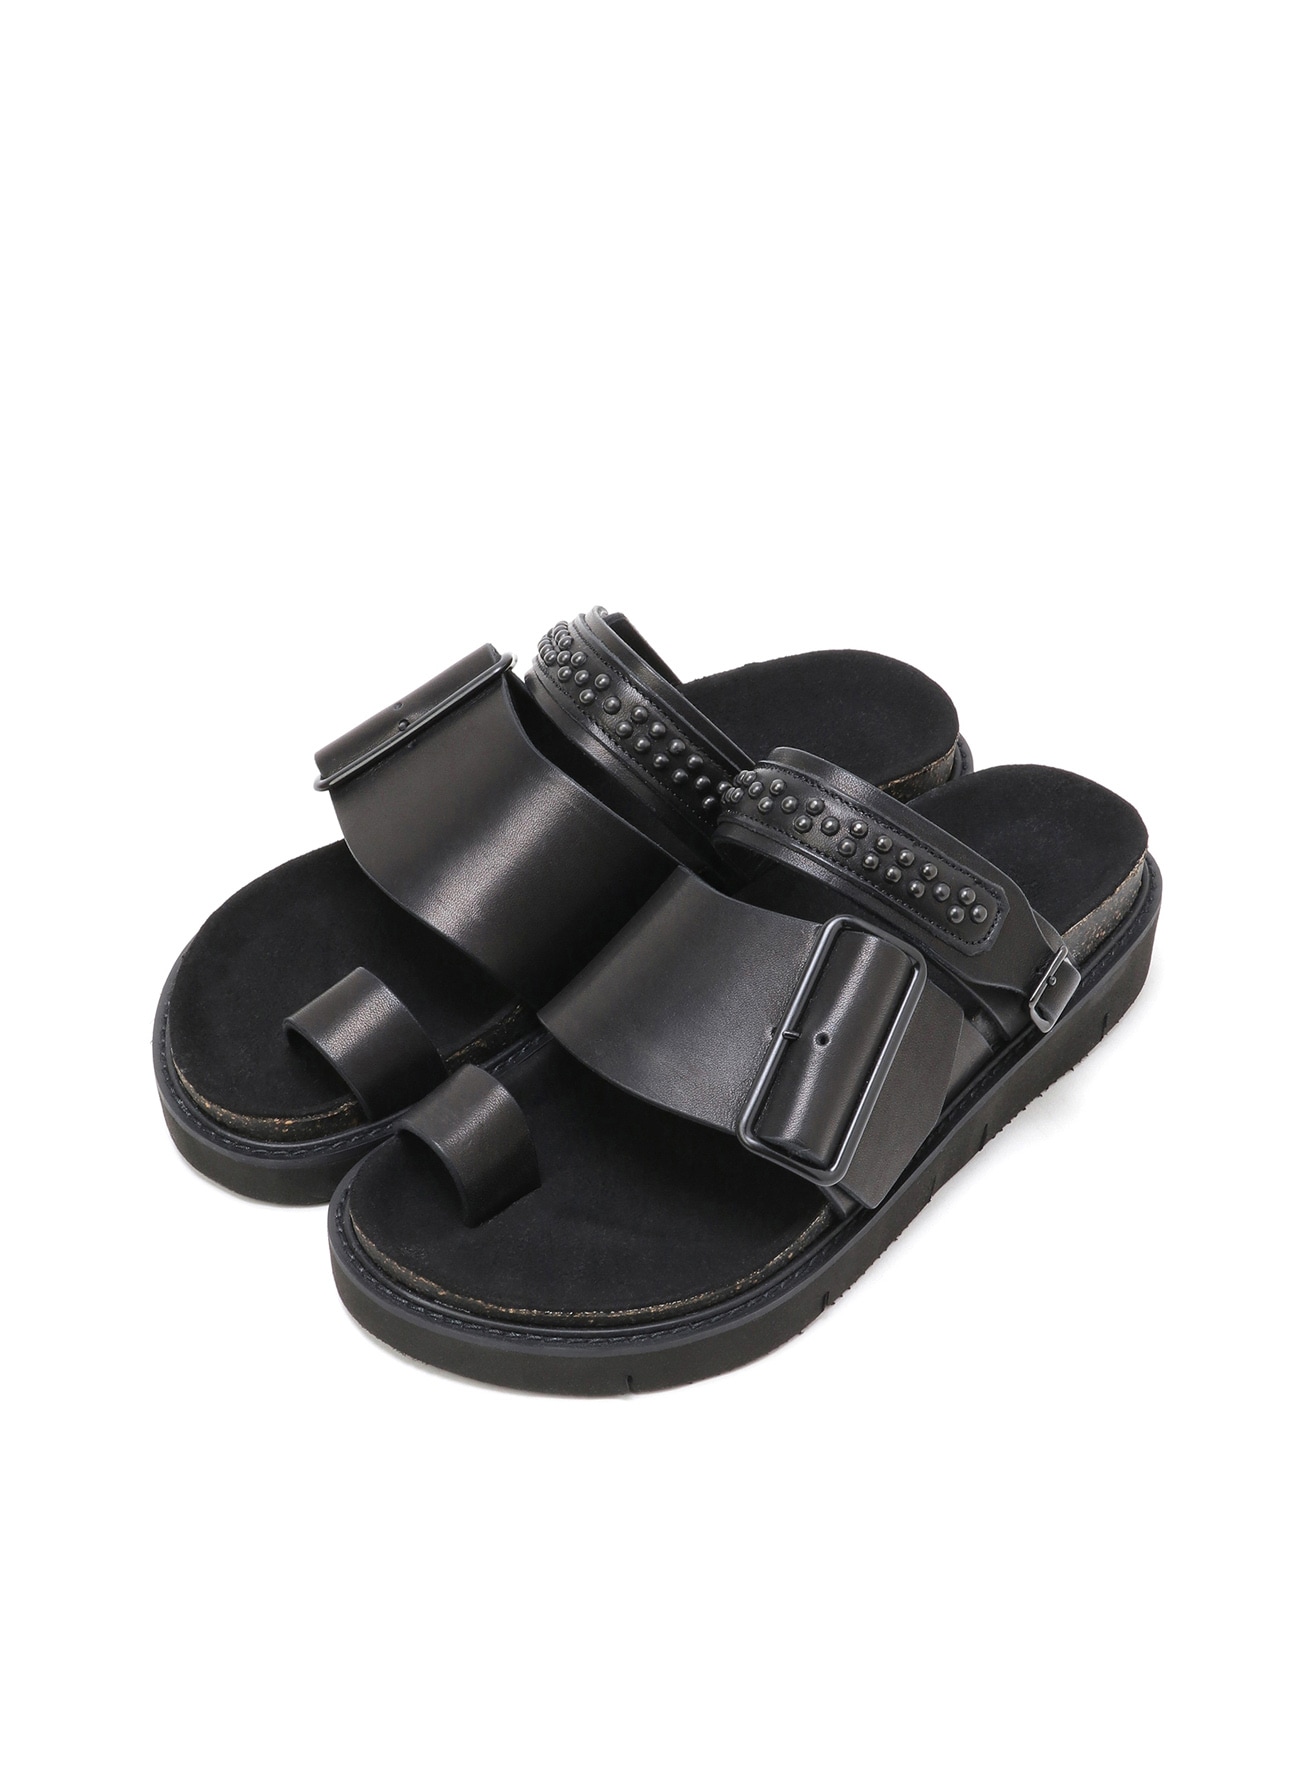 TANNED LEATHER STUDS SANDAL